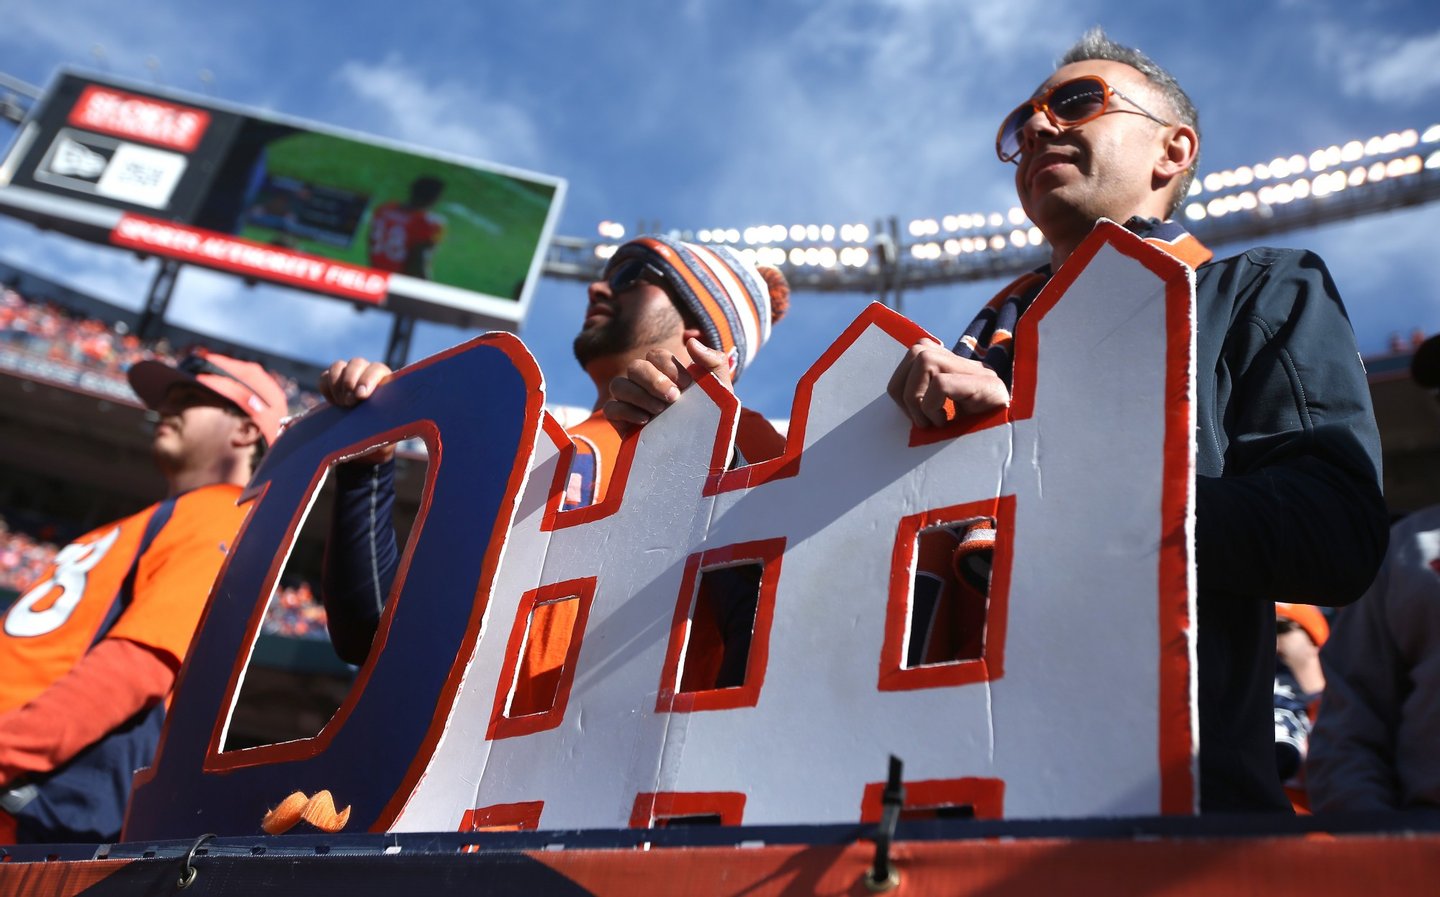 DENVER, CO - JANUARY 24: Fans hold a 'defense' sign prior to the AFC Championship game between the New England Patriots and the Denver Broncos at Sports Authority Field at Mile High on January 24, 2016 in Denver, Colorado. (Photo by Doug Pensinger/Getty Images)